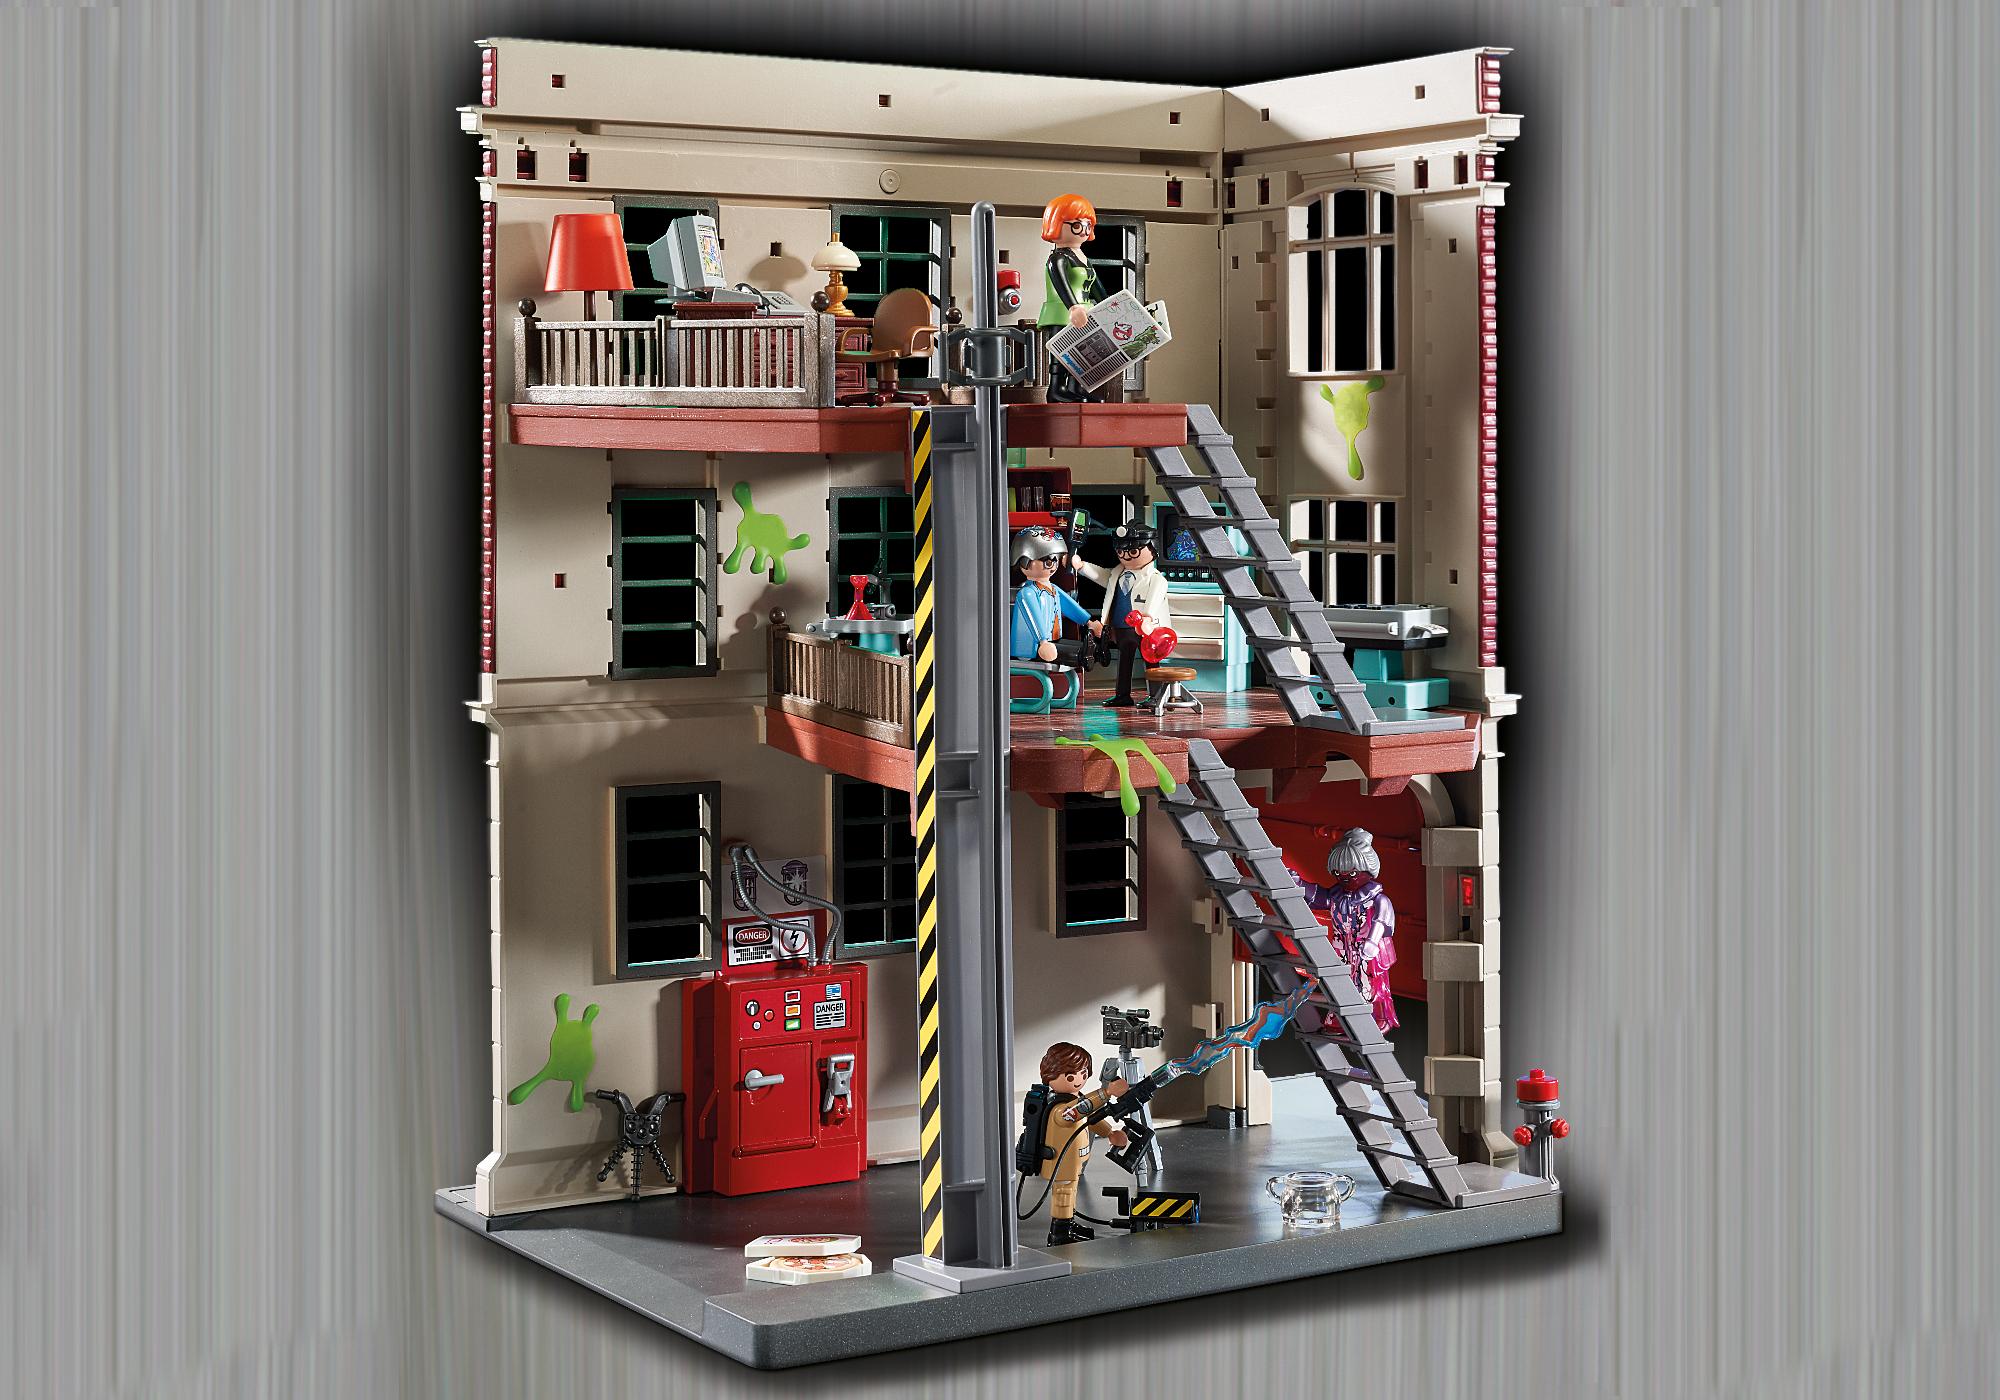 ghostbusters fire station toy